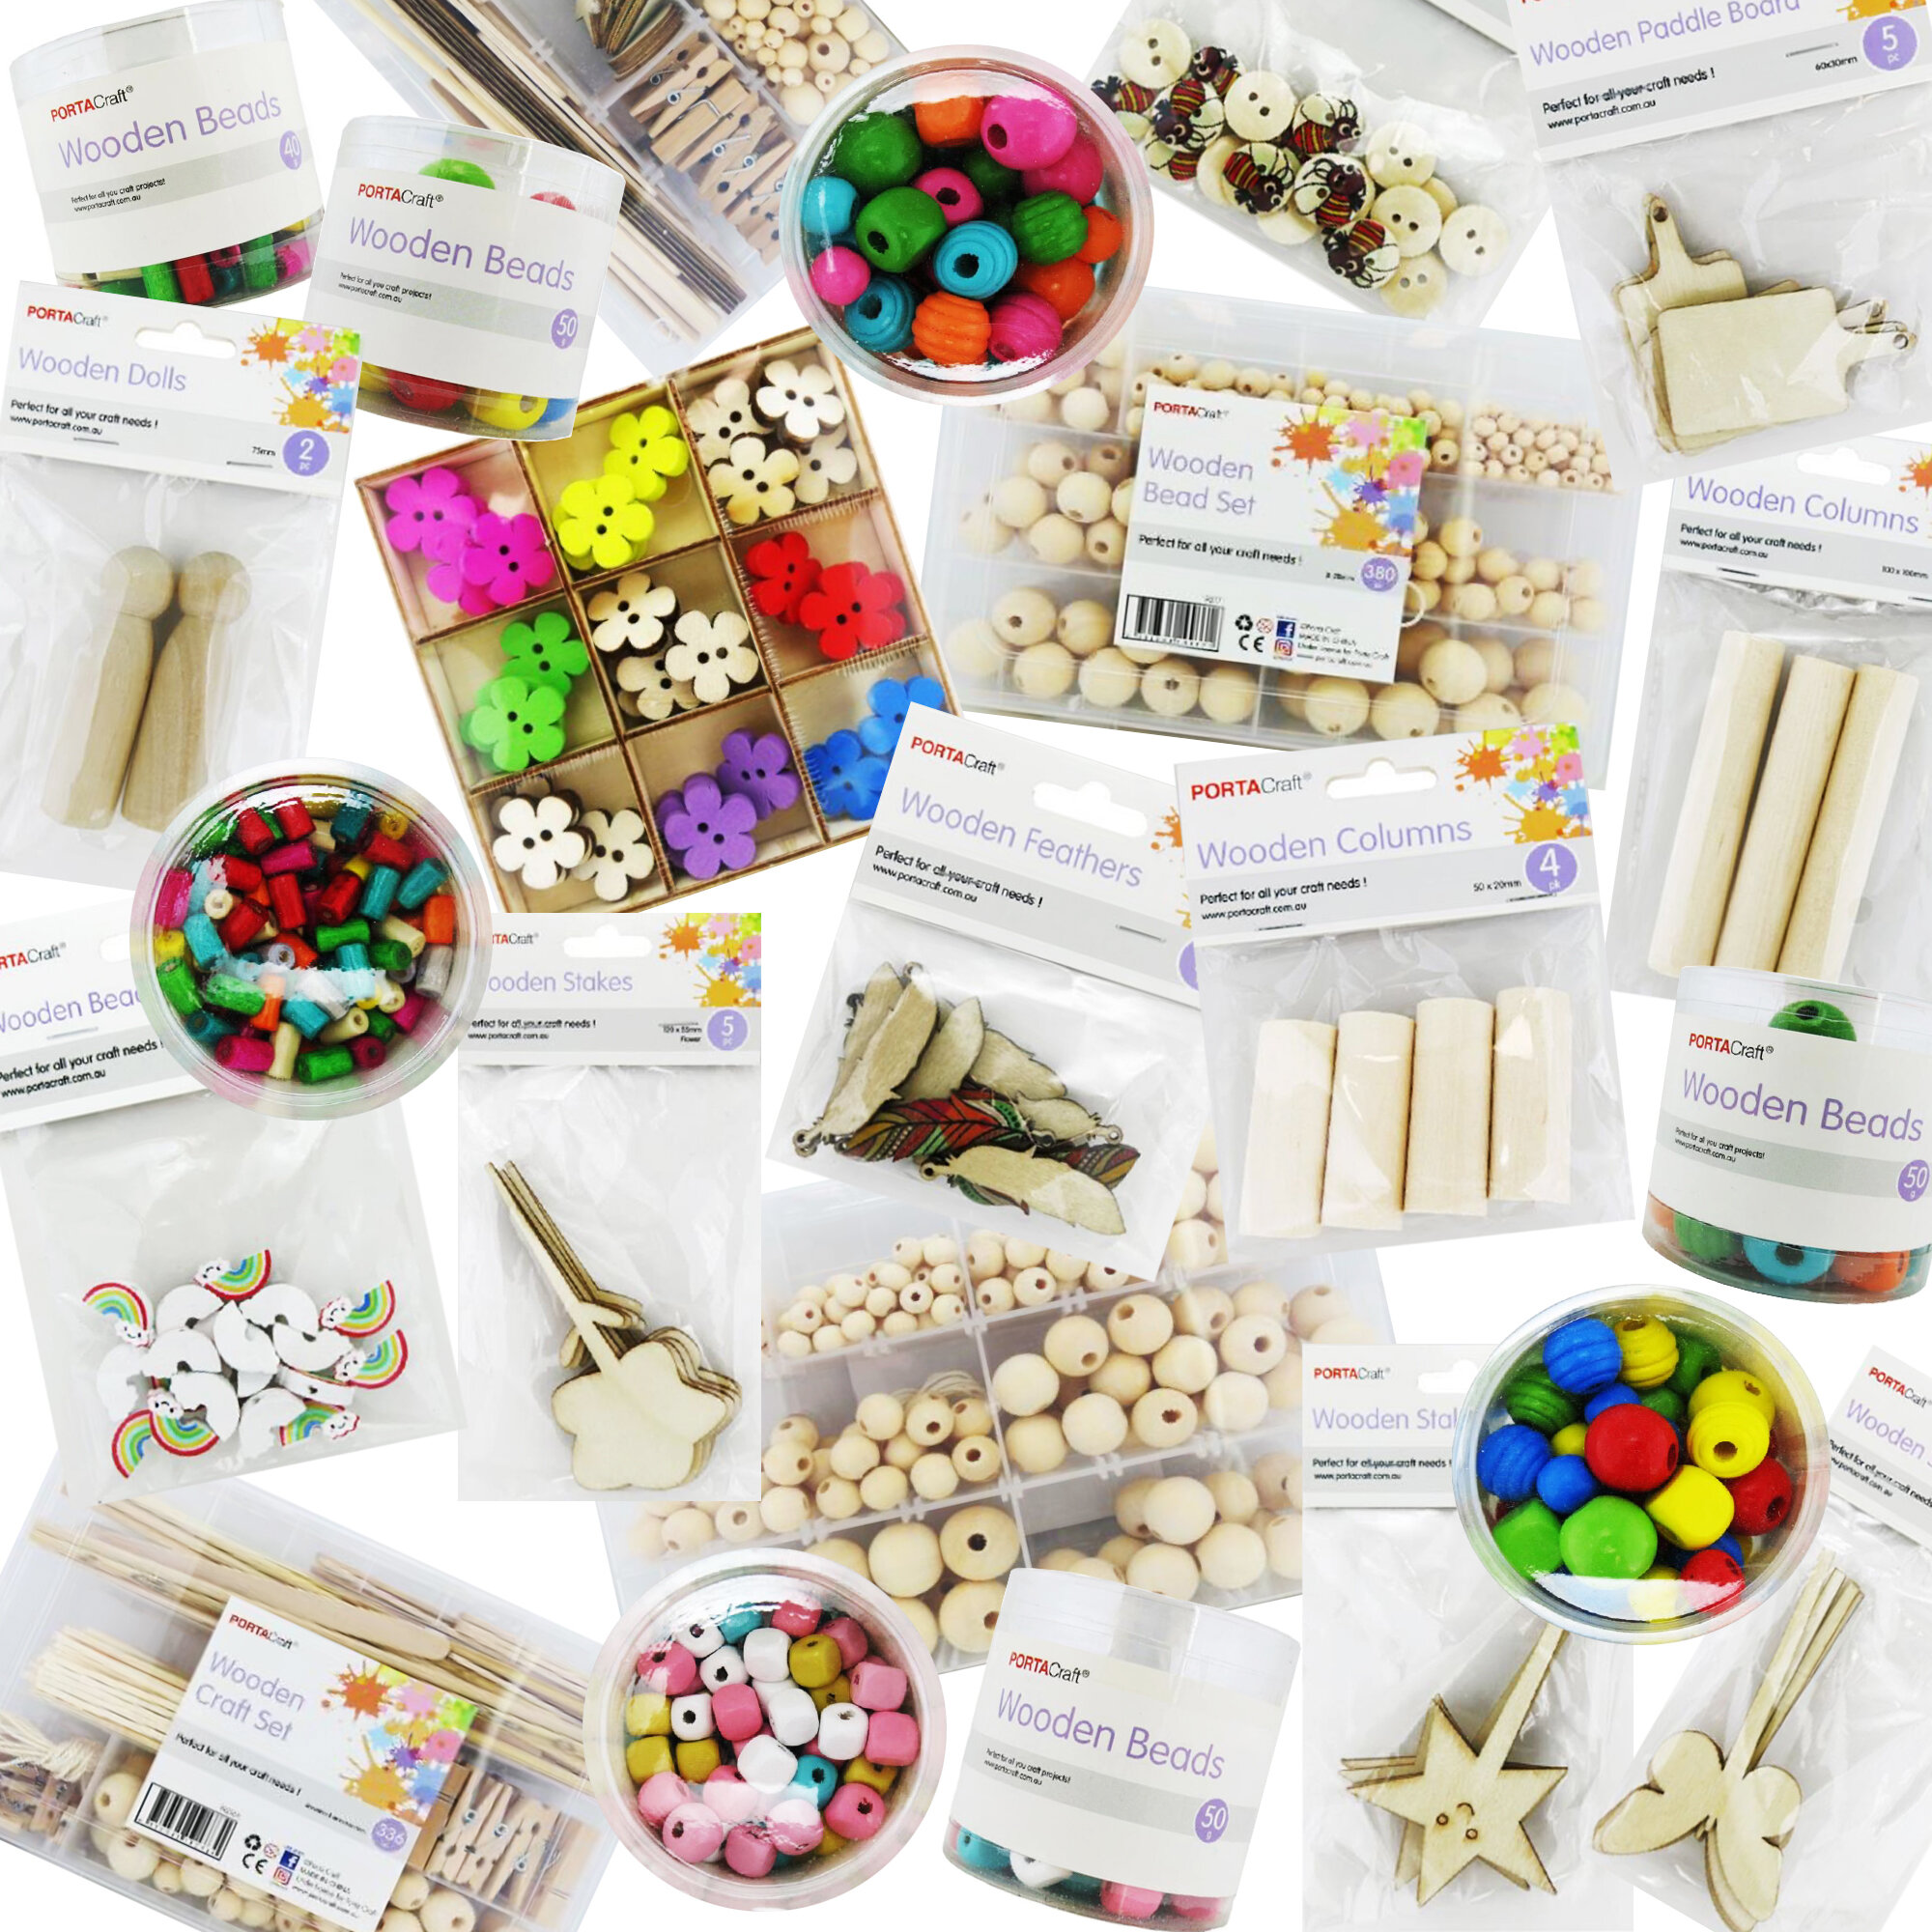 Well wood you look at these👀 New wooden craft accessories just arrived.
There's craft and there's Porta craft😉😀

#craft #stickers #wood #woodart #woodencraft #woodenembellishments #decorate #make #create #wecreateyoumake